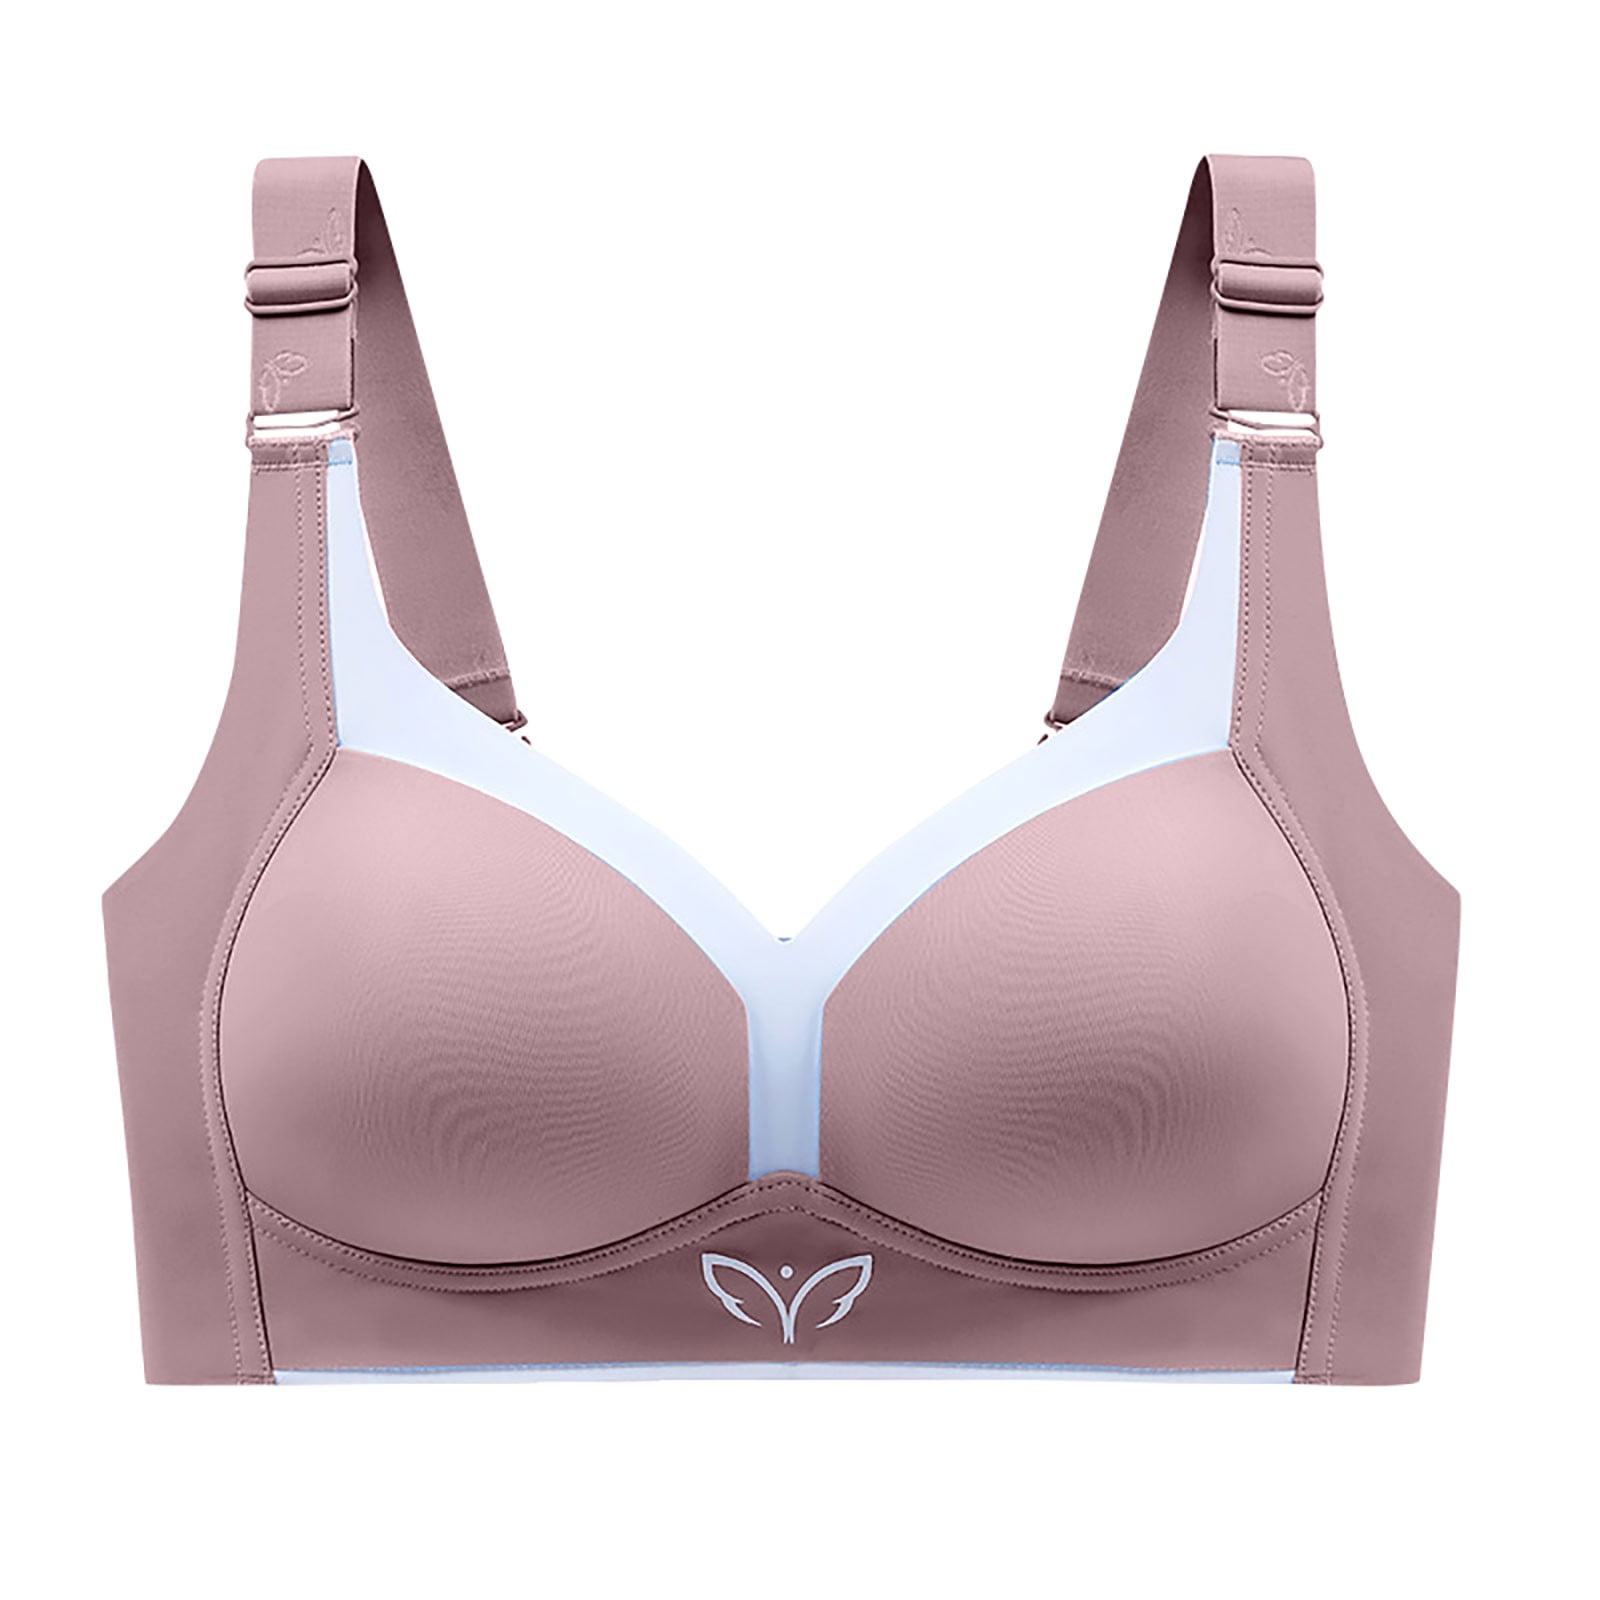 Sksloeg Comfort Bras for Women Wireless Push Up Bras for Women Support,  Full Coverage, Unlined Side Wire Support Bra,Pink 42C 